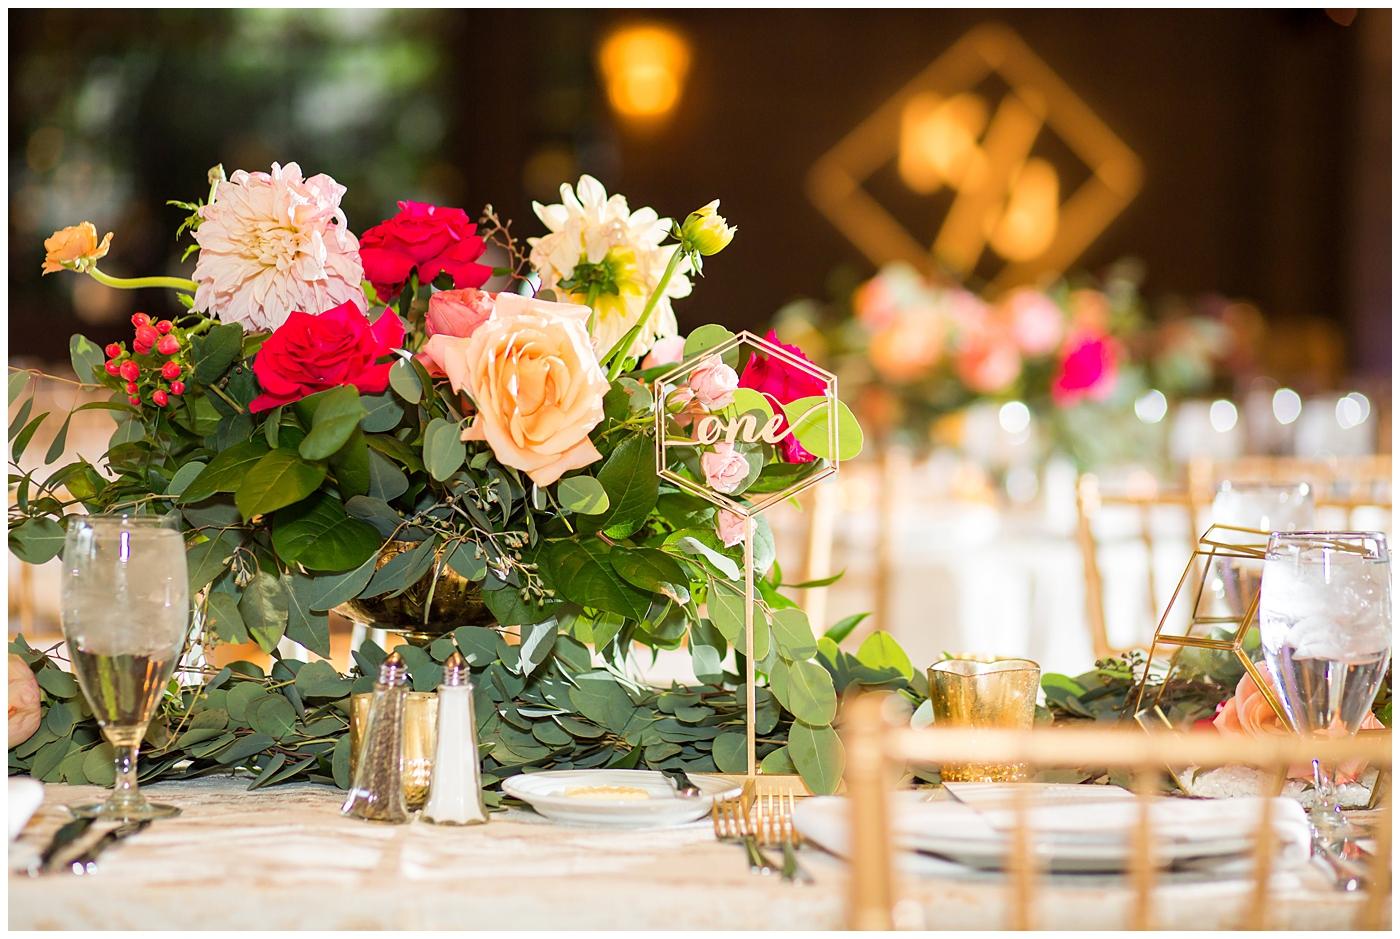 bright pink orange cream floral roses, dahlias centerpieces in gold vases with gold chairs and linens in ballroom wedding reception